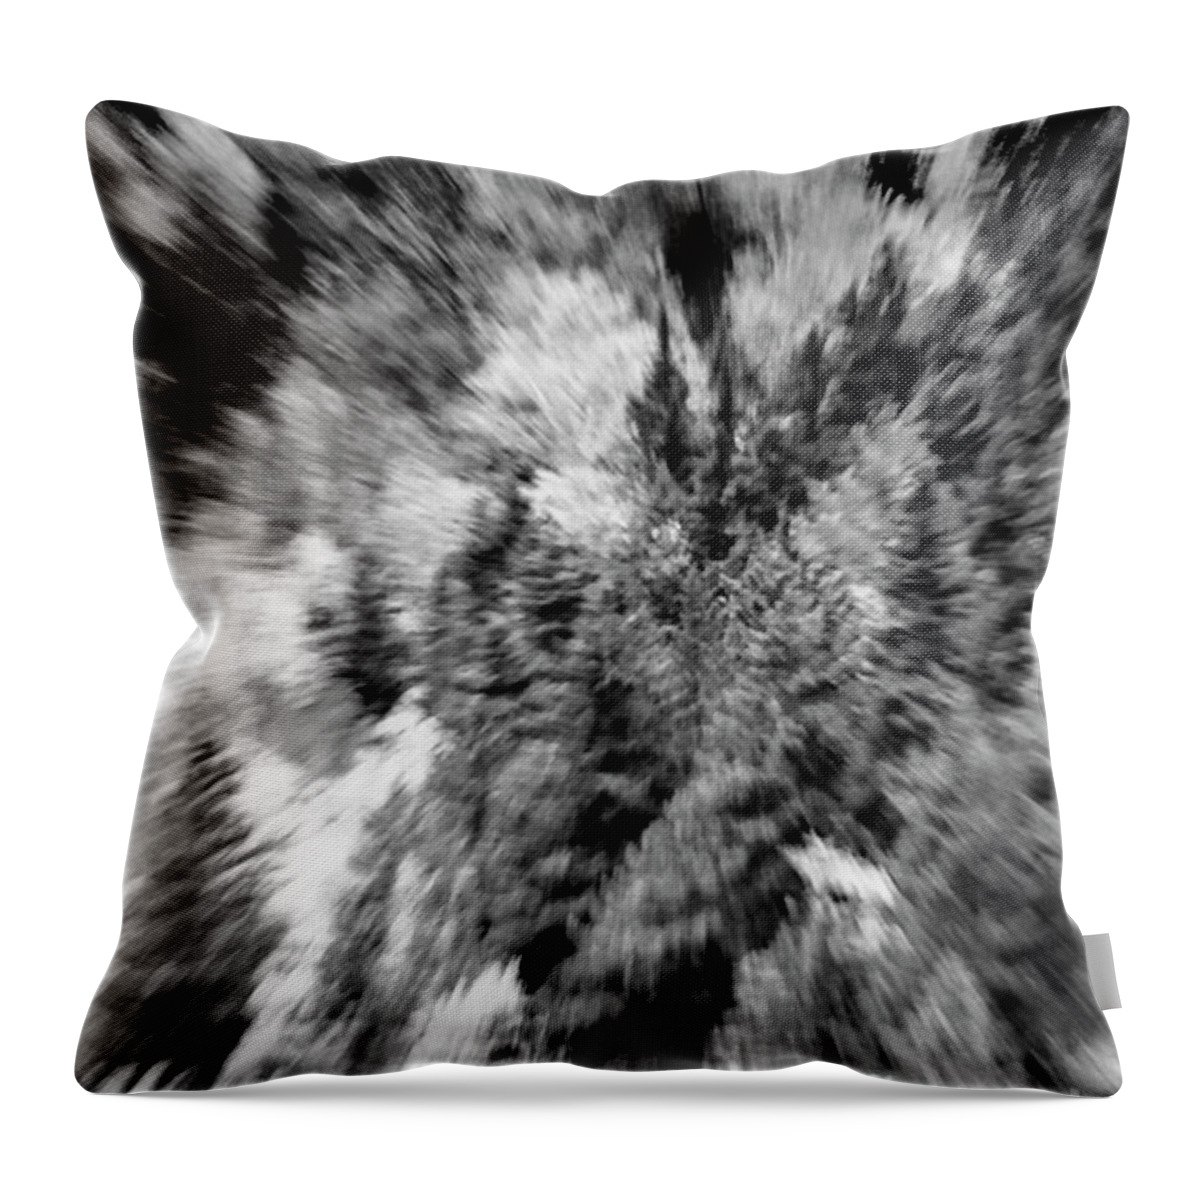 Abstract Throw Pillow featuring the photograph Abstract Forest Photography 5501e3 by Ricardos Creations